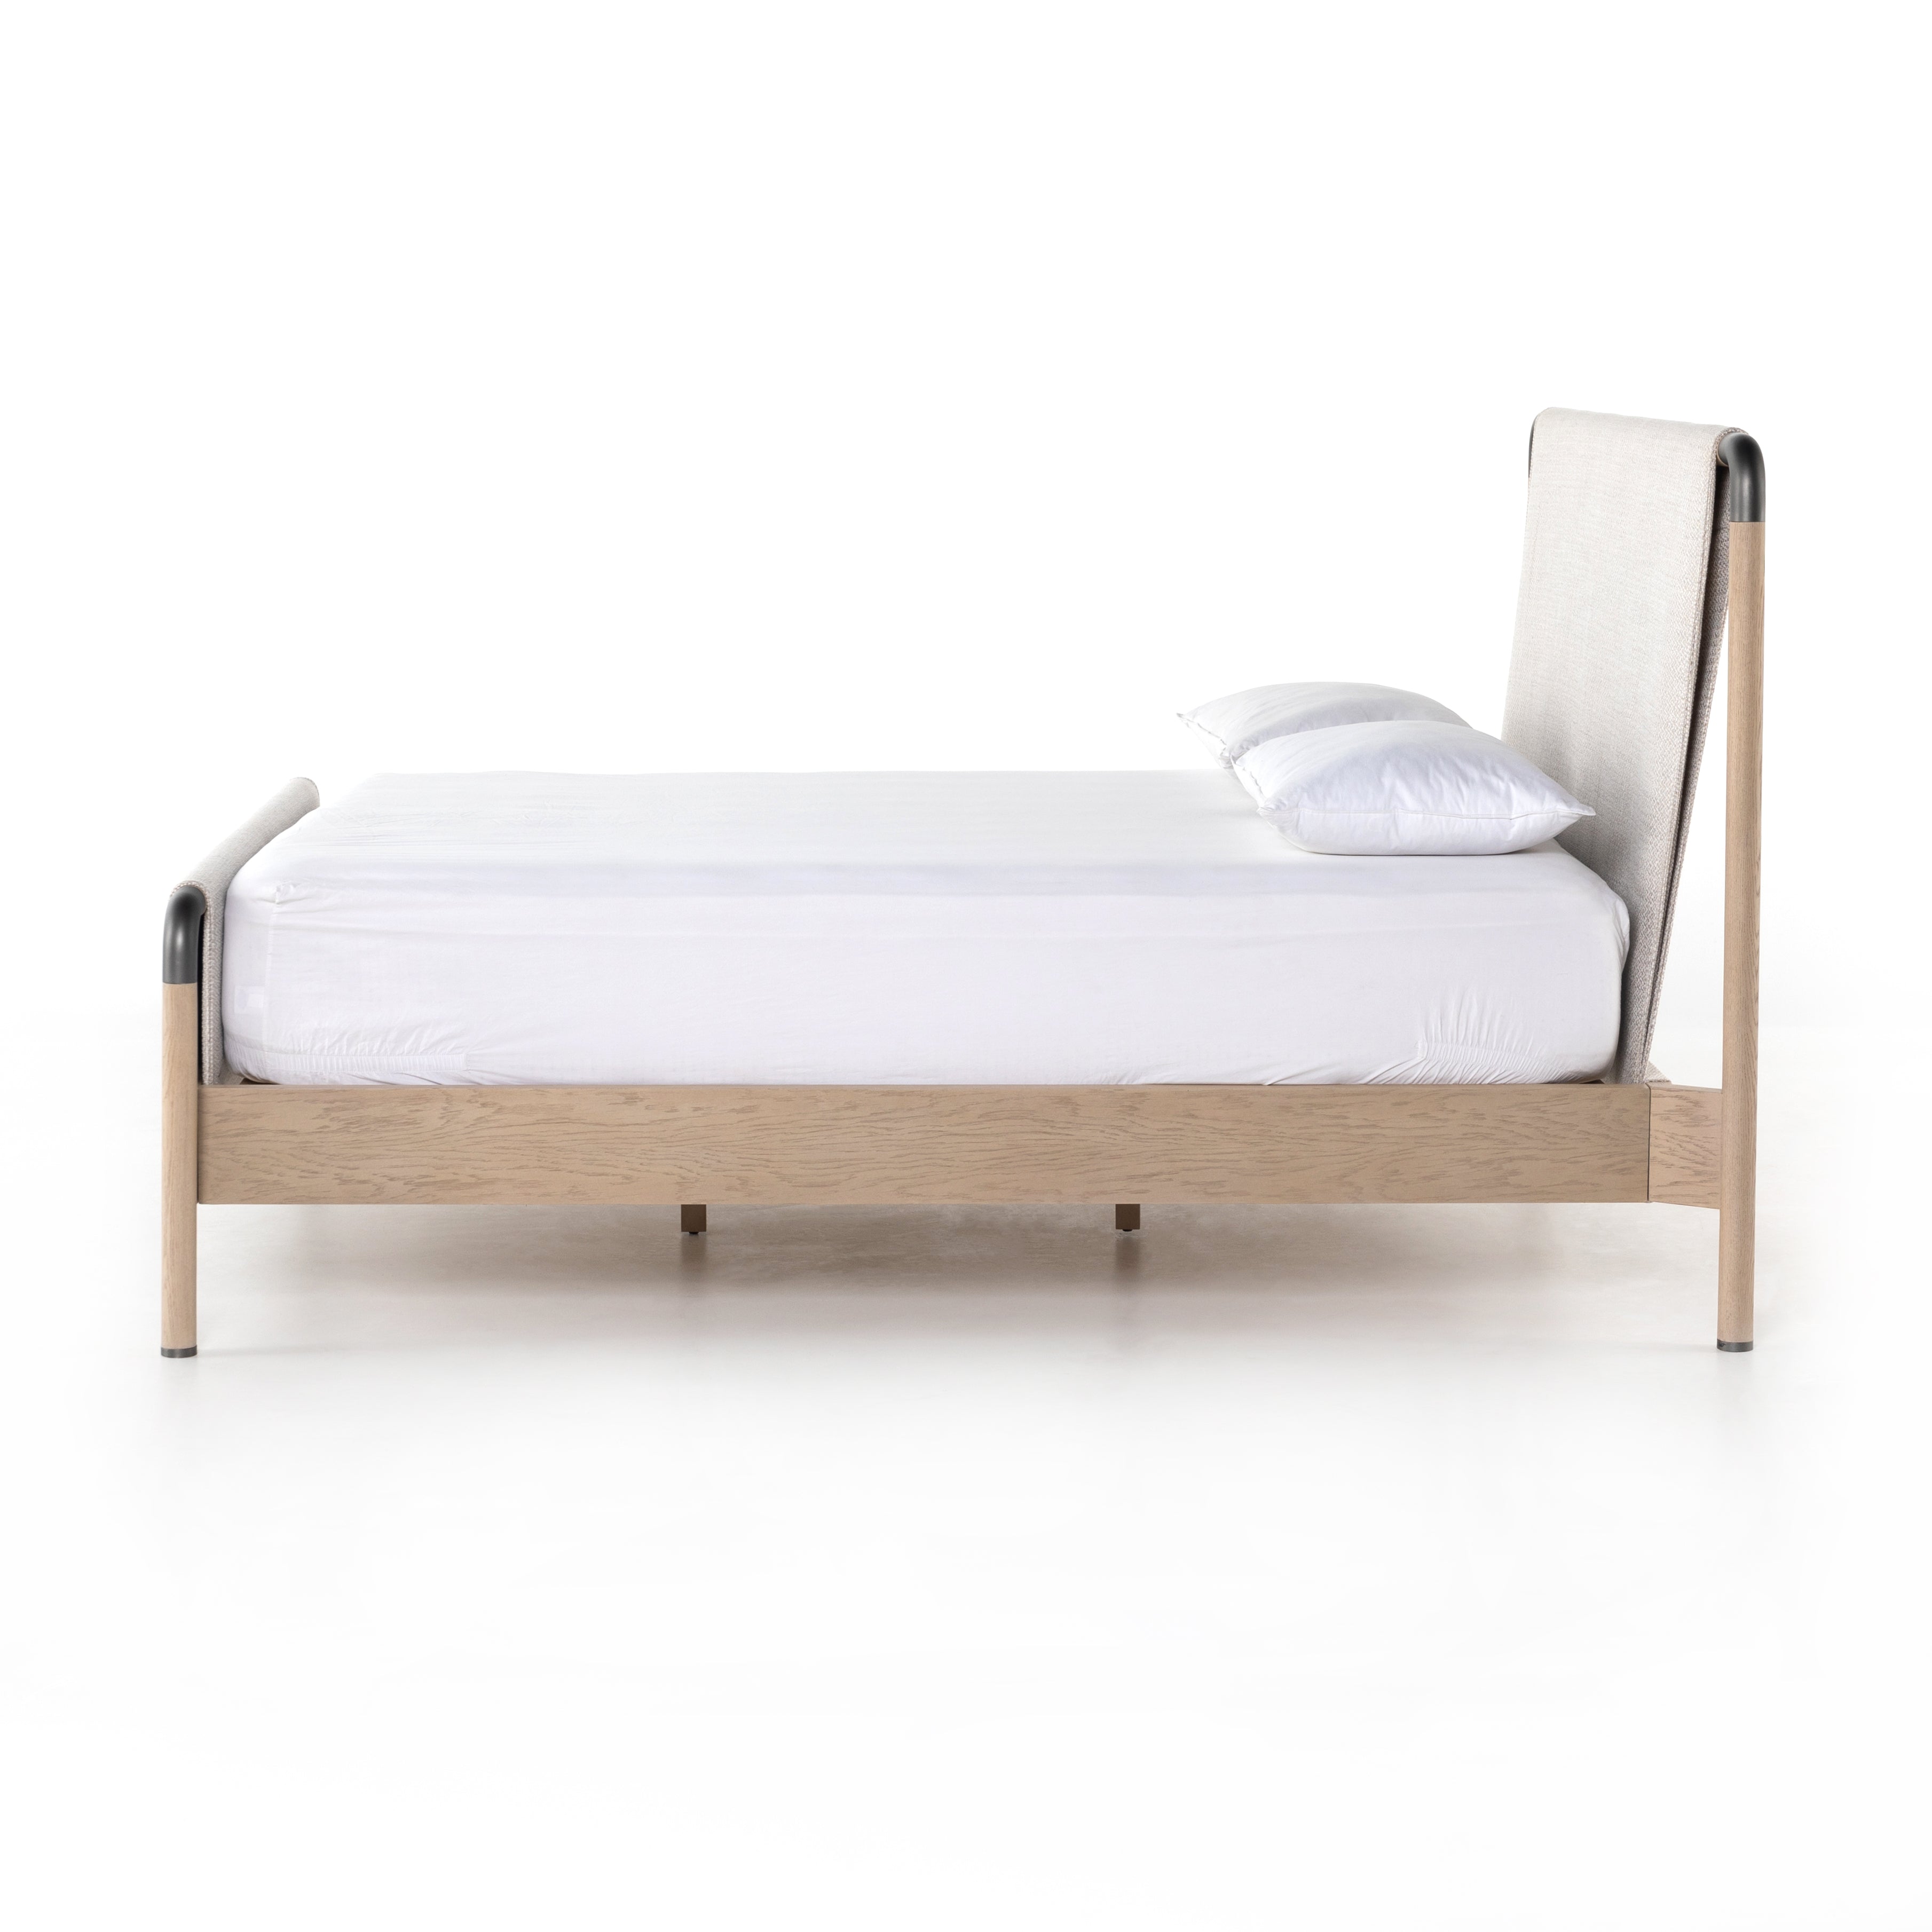 We love the mixed materials of this Harriet Bed. Framed by solid oak with rounded iron corners, an upholstered, sling-style headboard brings a light, modern vibe to any bedroom. Queen Overall Dimensions: 70.50"w x 88.50"d x 51.00"h  King Overall Dimensions: 86.50"w x 88.50"d x 51.00"h